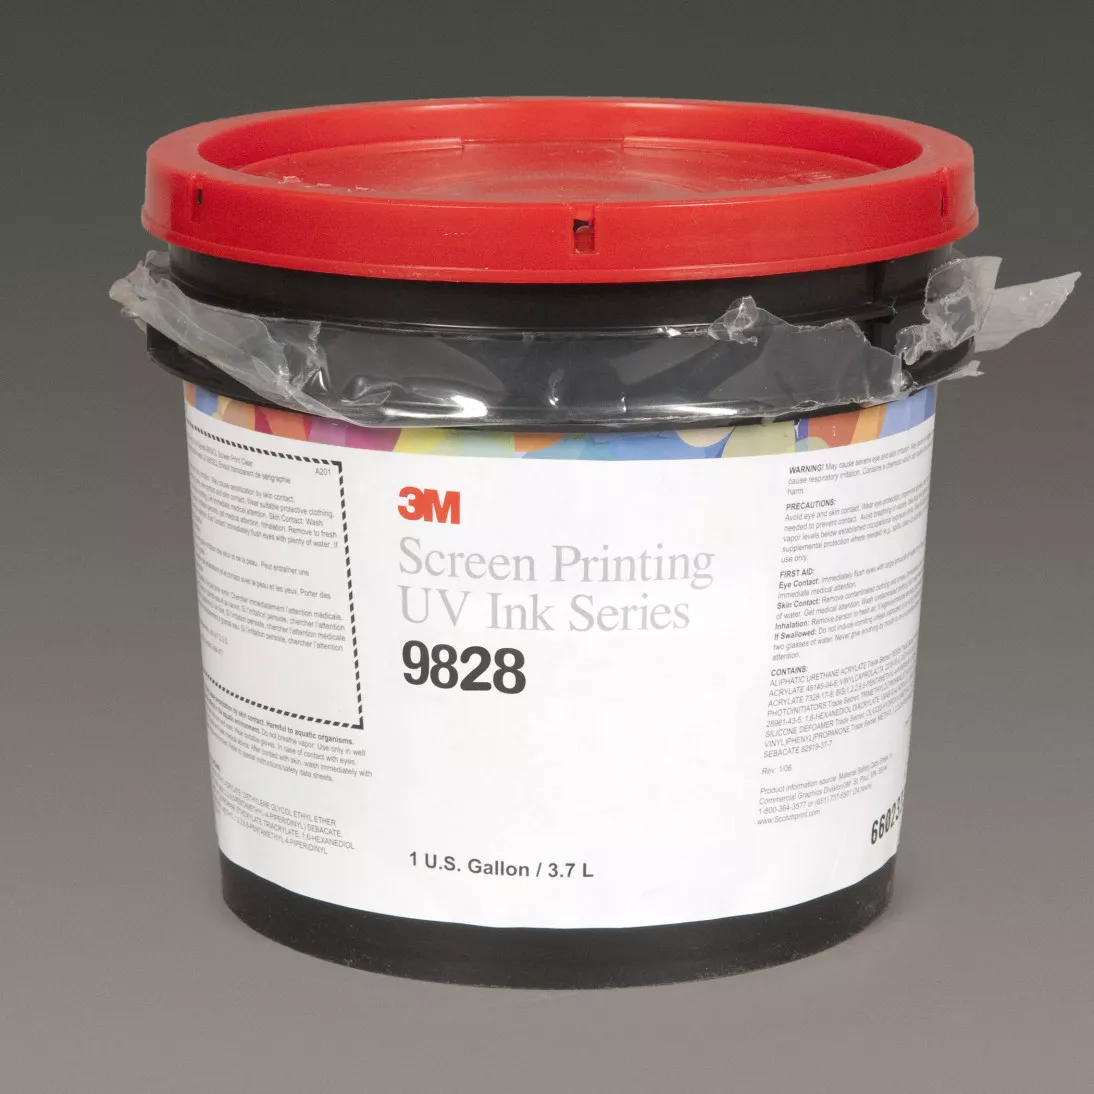 3M™ Screen Printing UV Ink 9828, Transparent Red (YS), 1 Gallon
Container